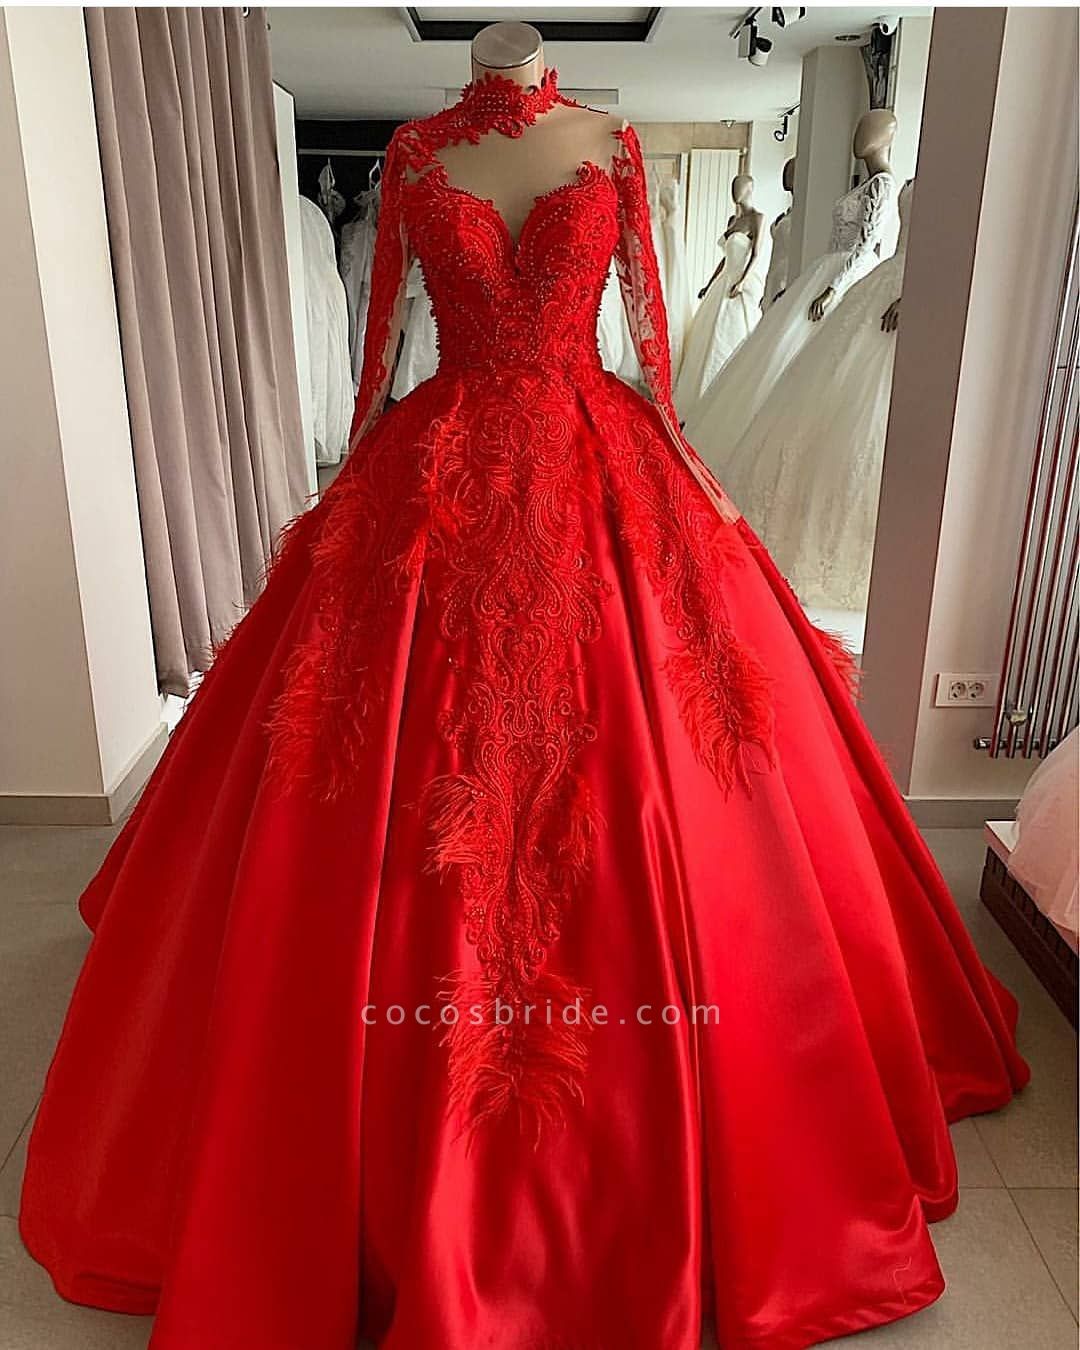 Dignified Red Sweetheart Long Sleeve Appliques Lace Ball Gown Prom Dresses